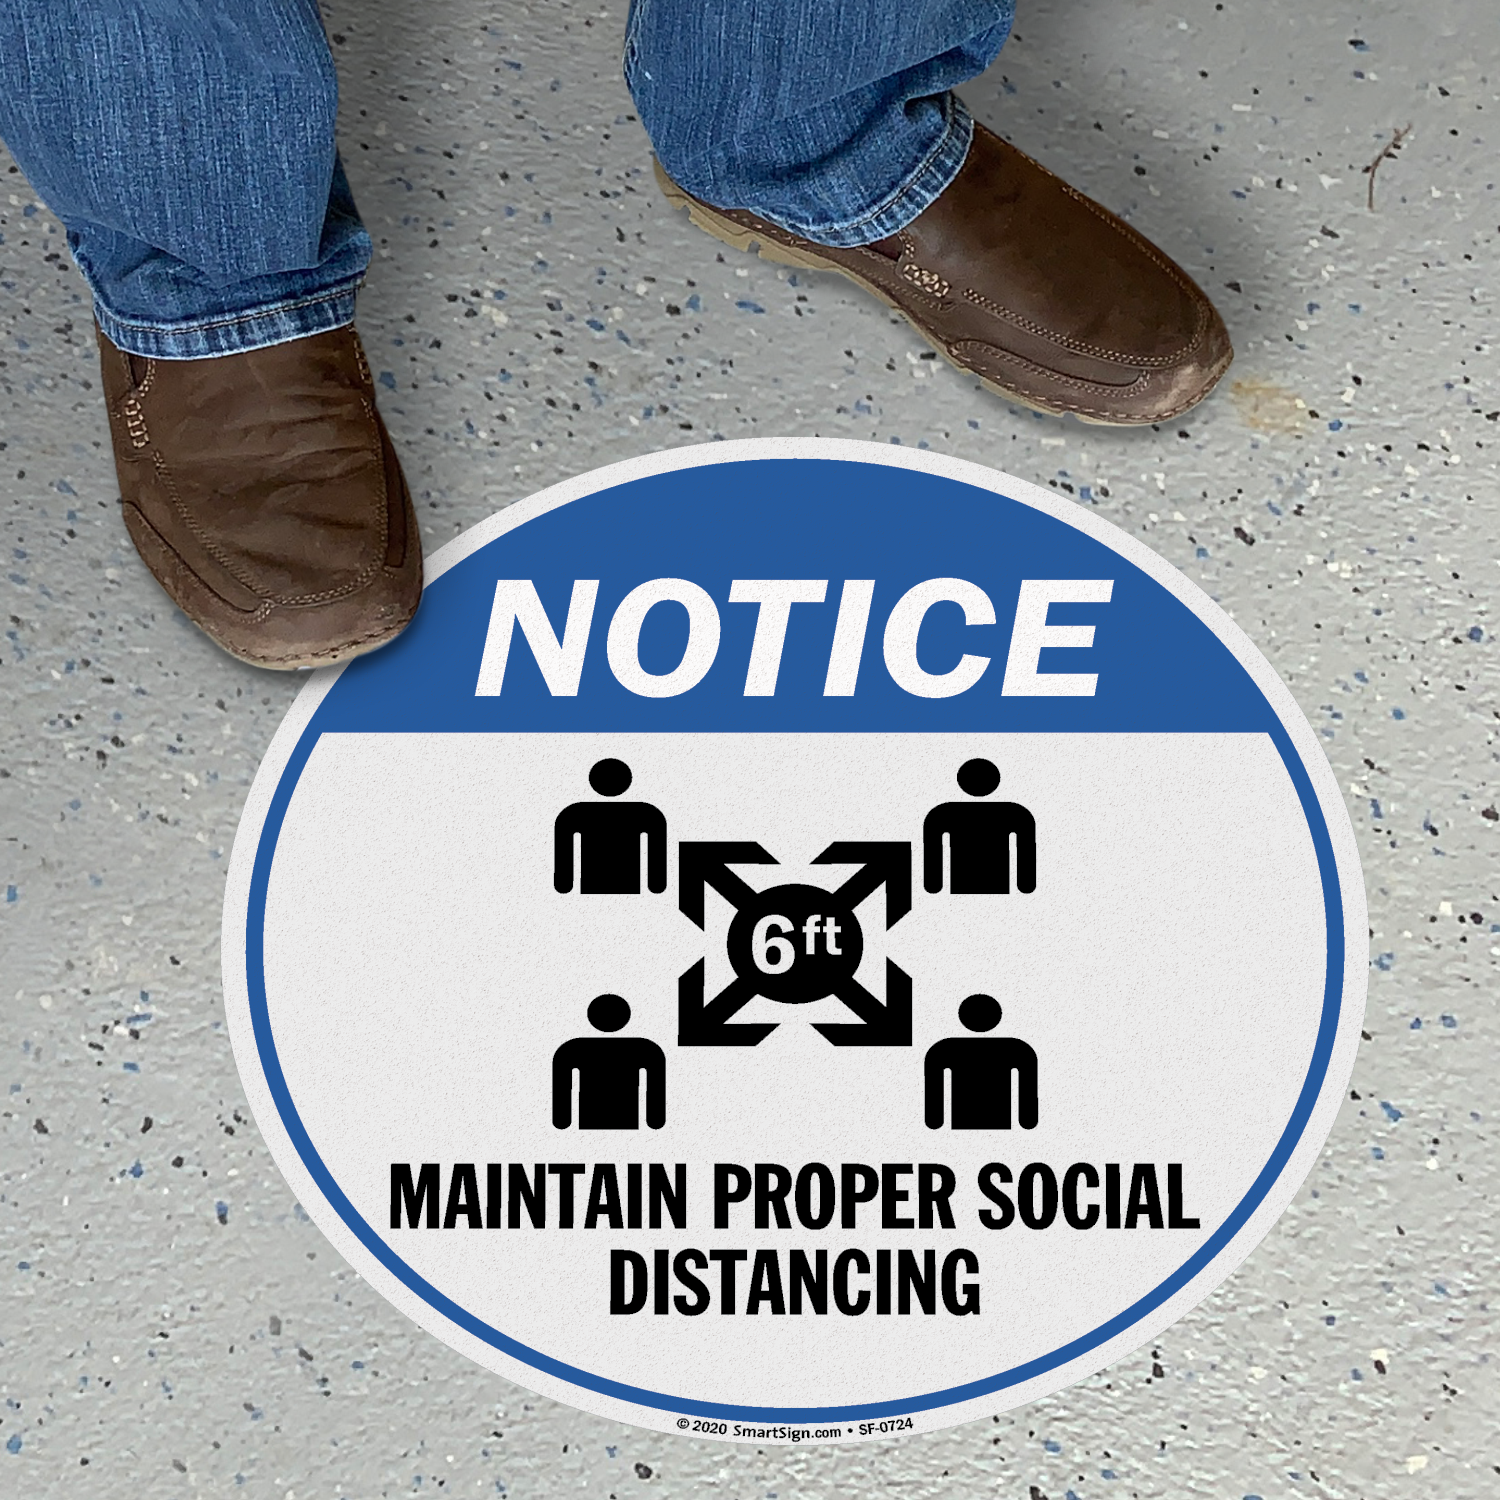 FLOOR GRAPHICS  PACK OF 10 KEEP A SAFE DISTANCE 6' SOCIAL DISTANCING 4" X 24" 